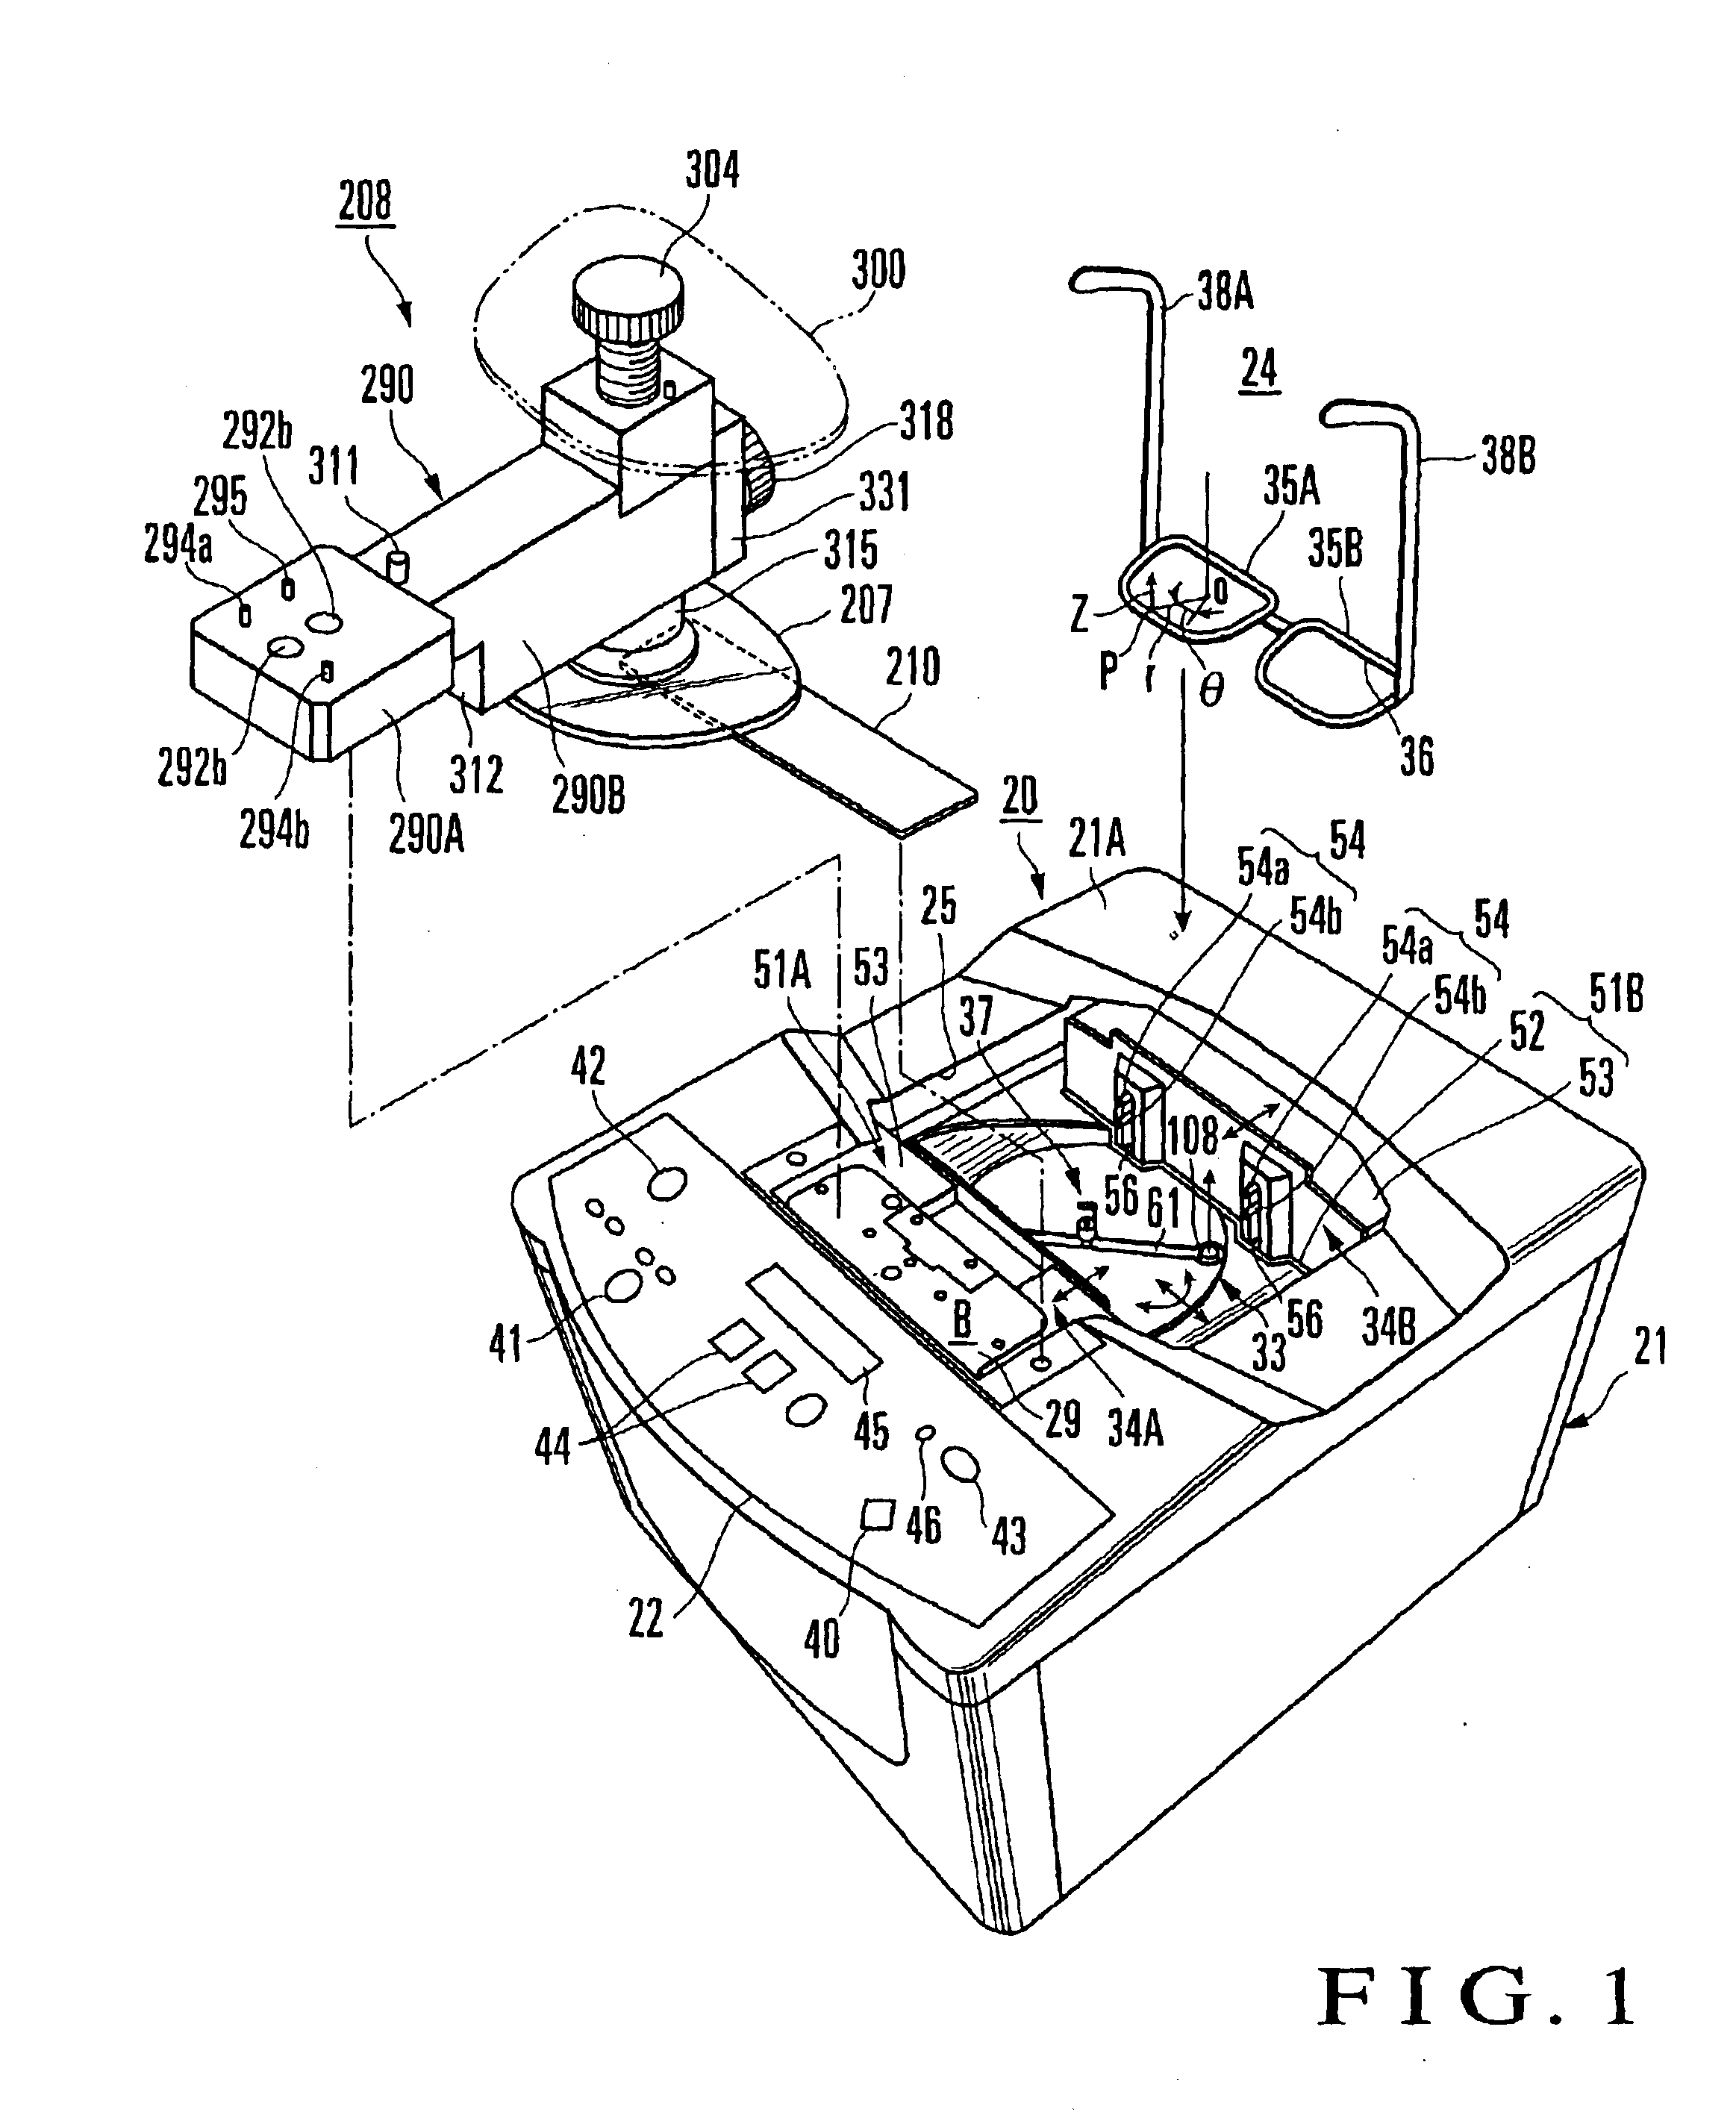 Spectacle frame shape measuring apparatus